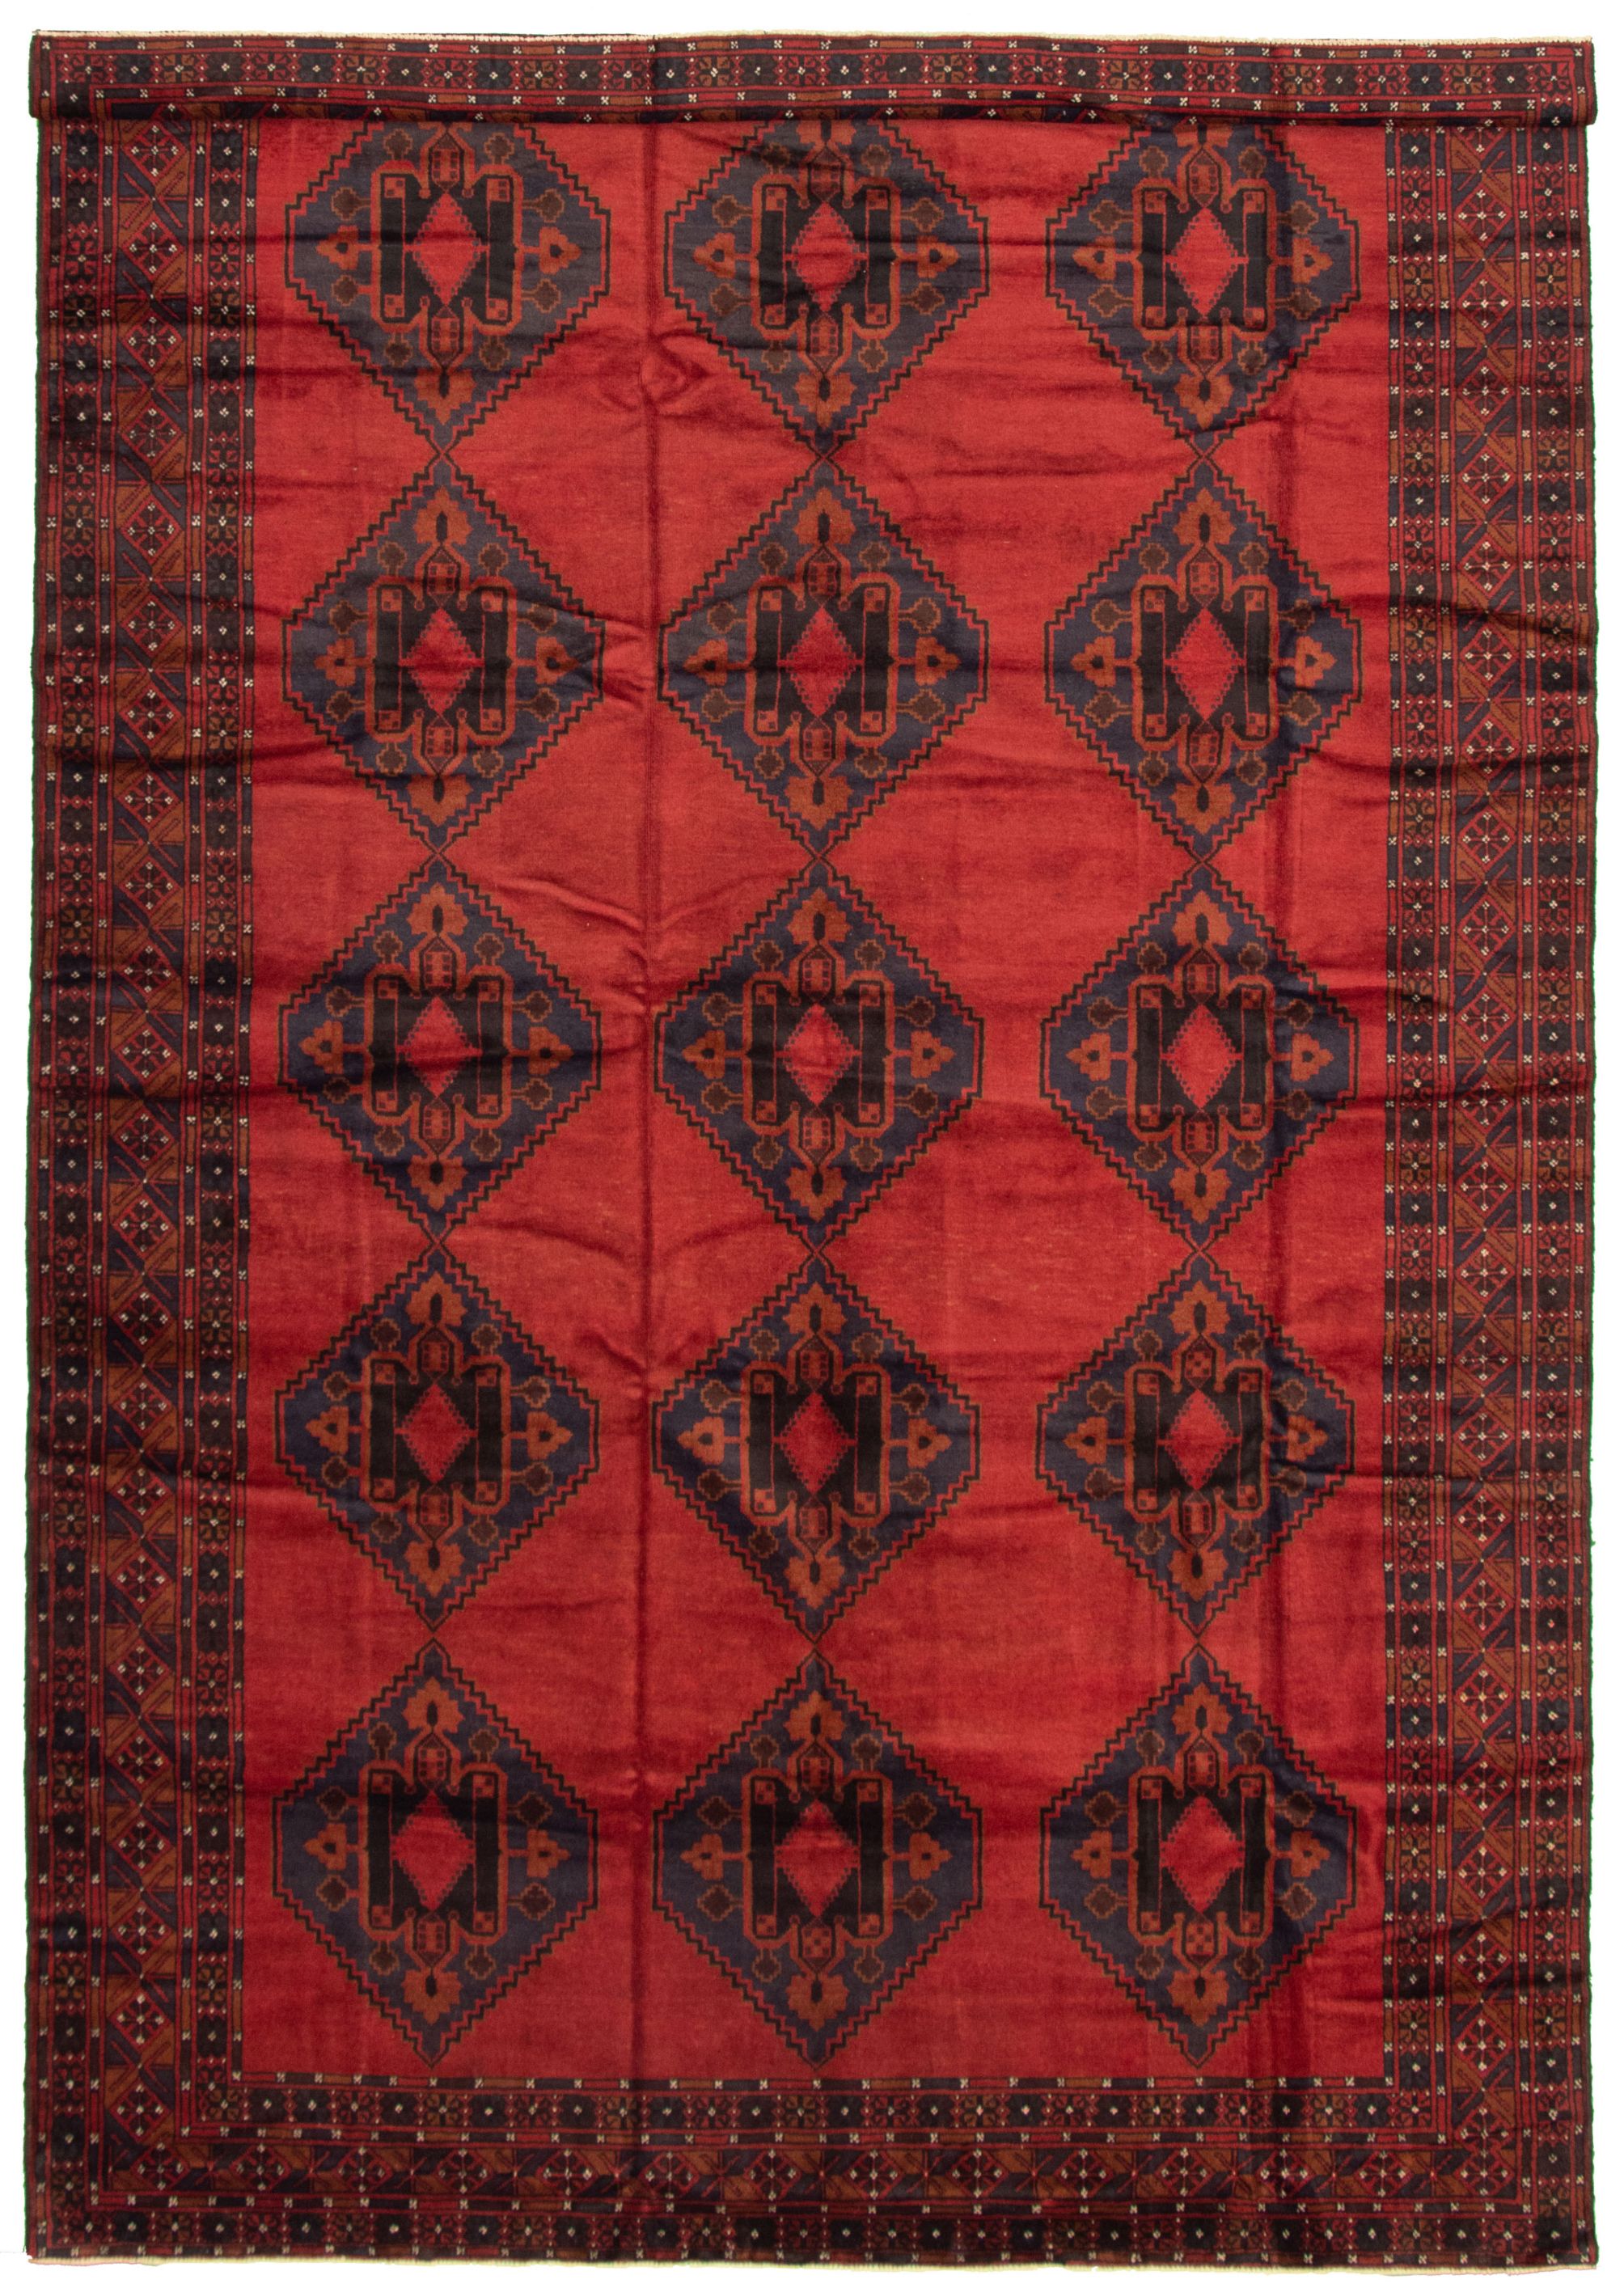 Hand-knotted Teimani Red Wool Rug 7'10" x 12'4" Size: 7'10" x 12'4"  